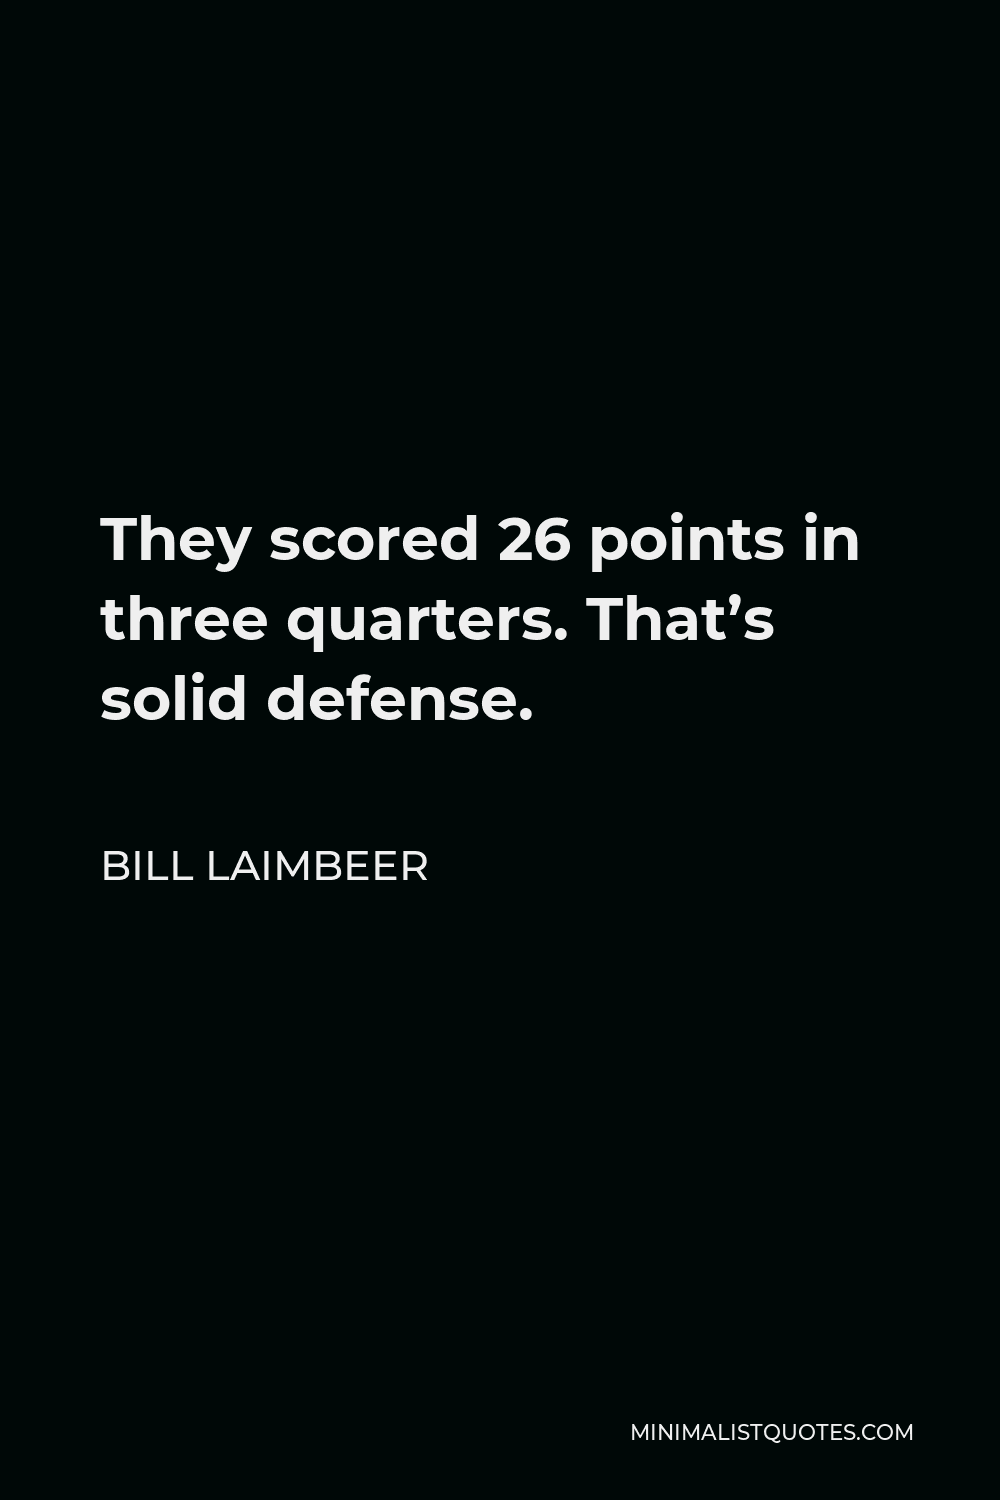 Bill Laimbeer Quote - They scored 26 points in three quarters. That’s solid defense.